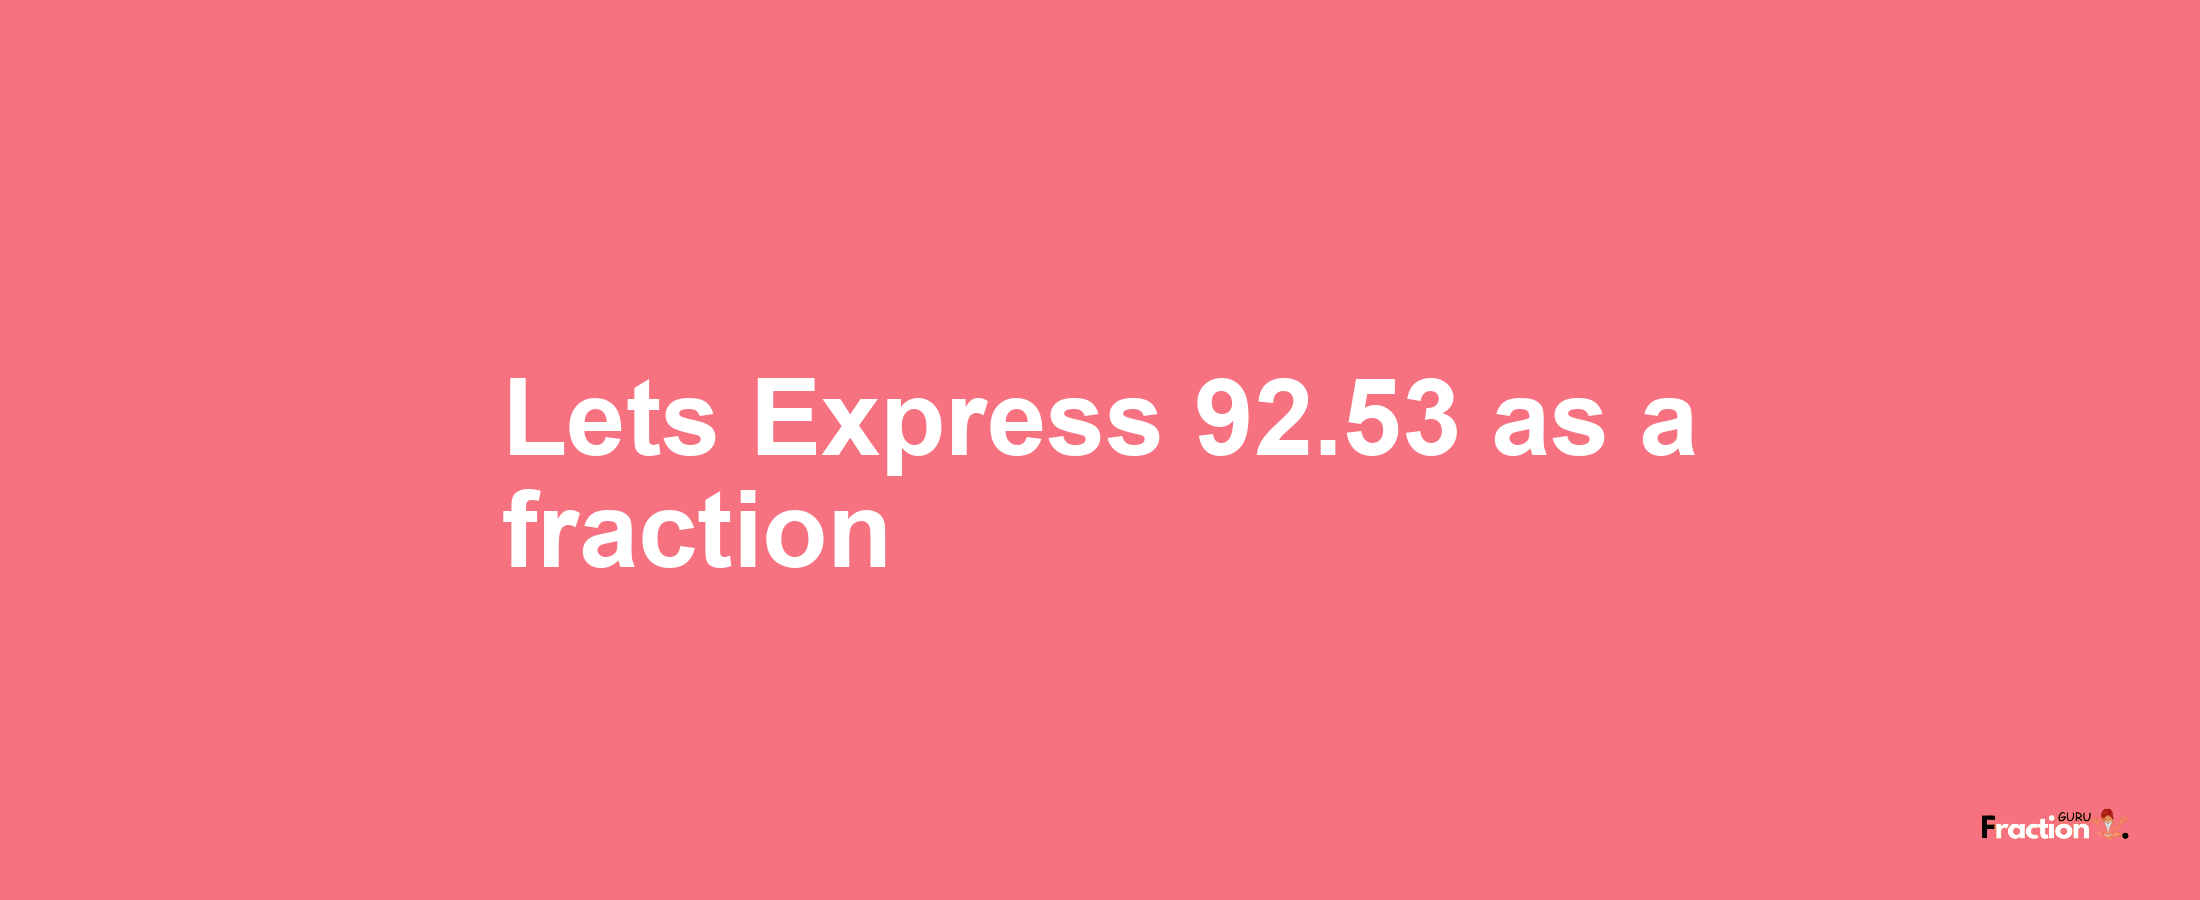 Lets Express 92.53 as afraction